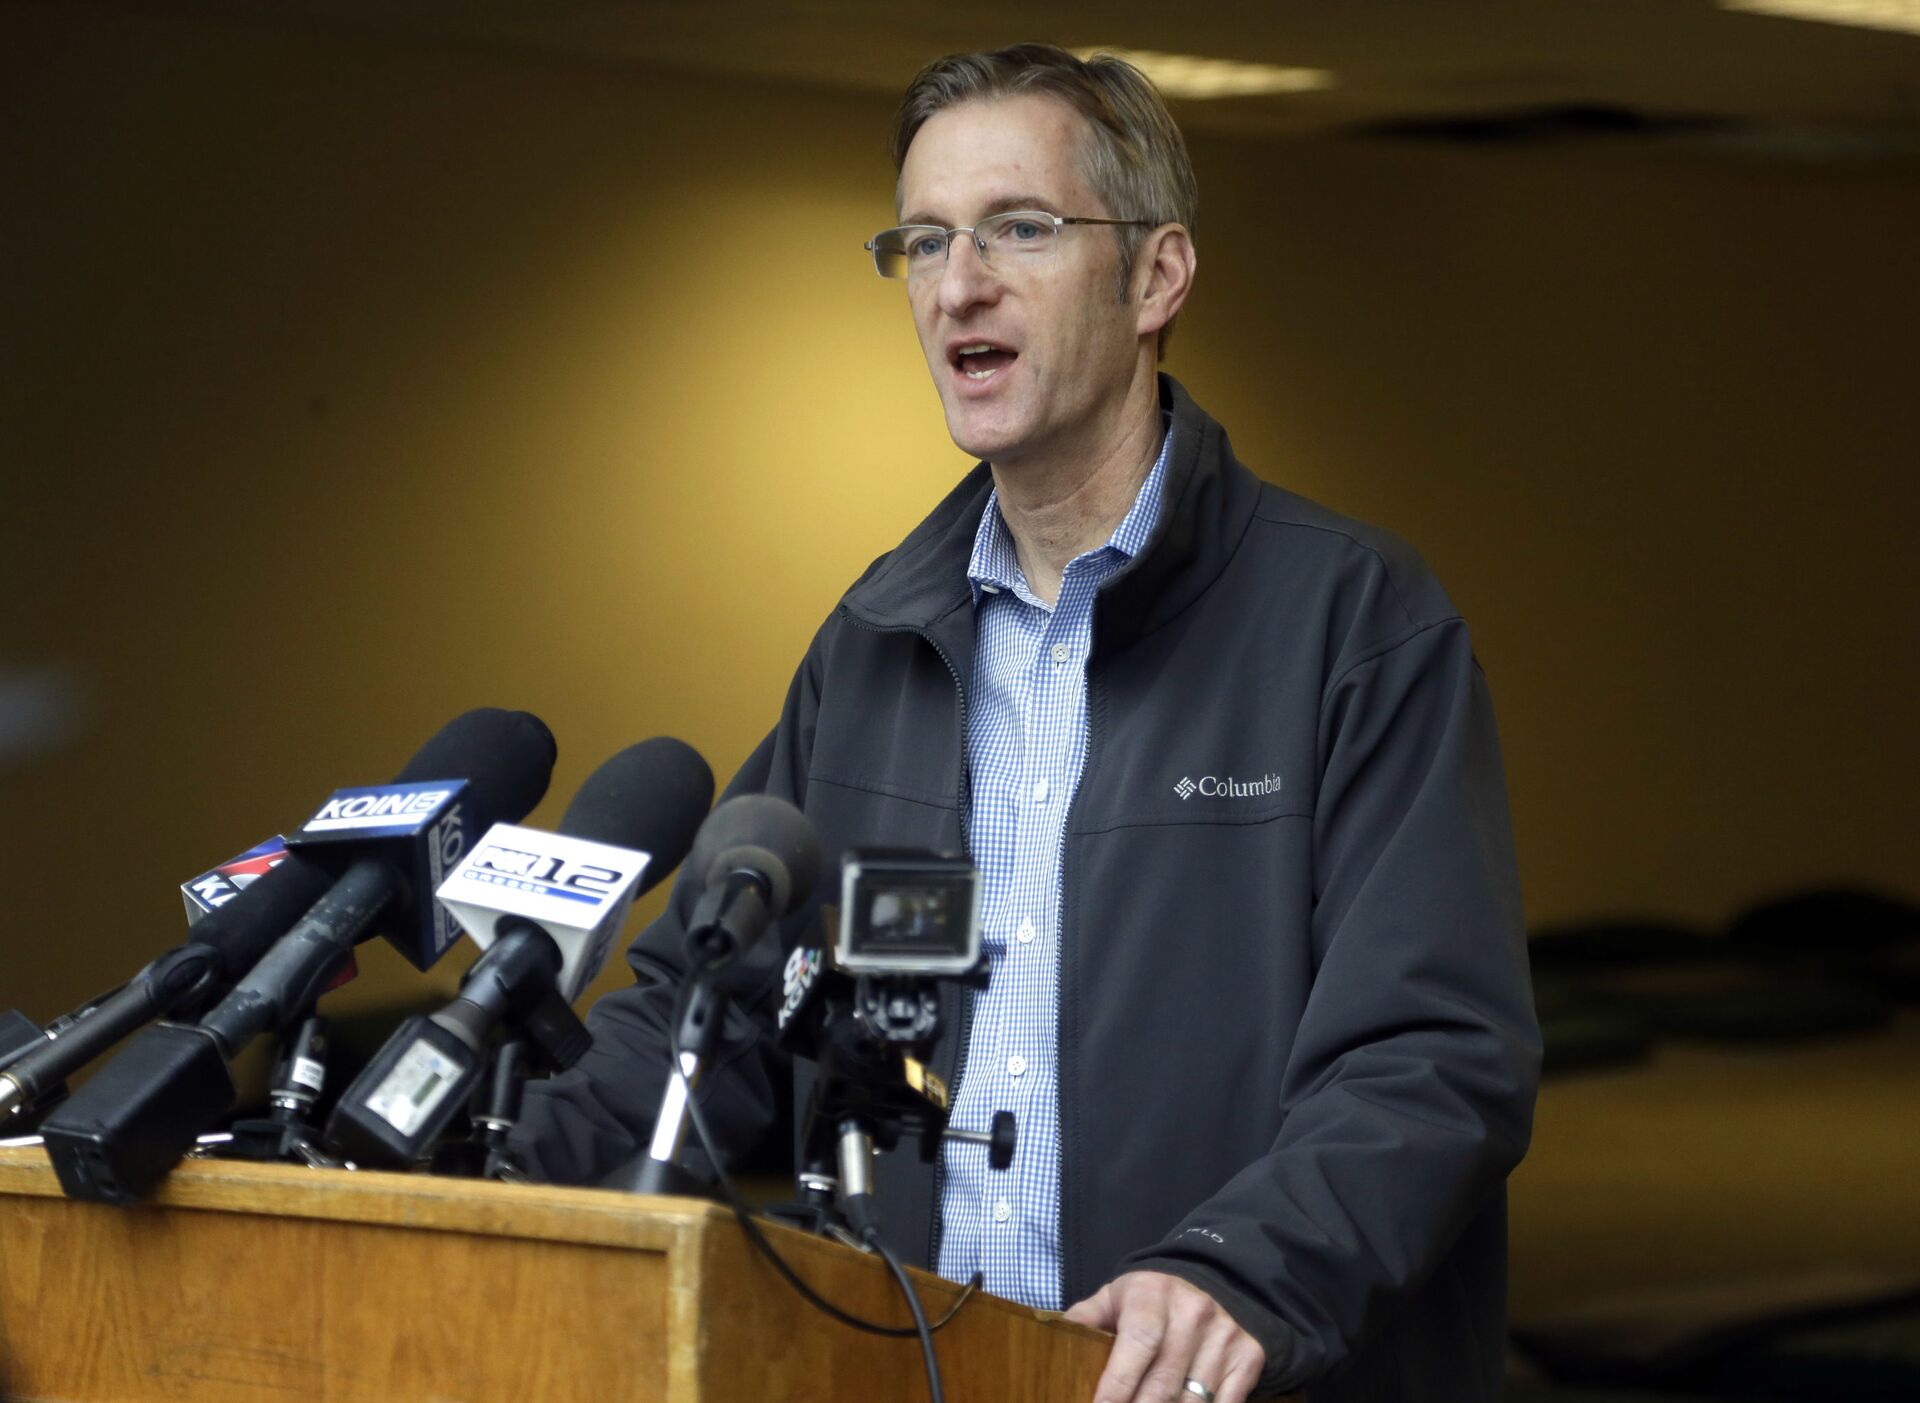 In this Jan. 17, 2017, file photo, Portland Mayor Ted Wheeler speaks during a press conference in Portland, Ore. A Portland man is suing the city and Wheeler, claiming the mayor's office has improperly kept secret records about a homeless shelter project.  - Sputnik International, 1920, 07.09.2021